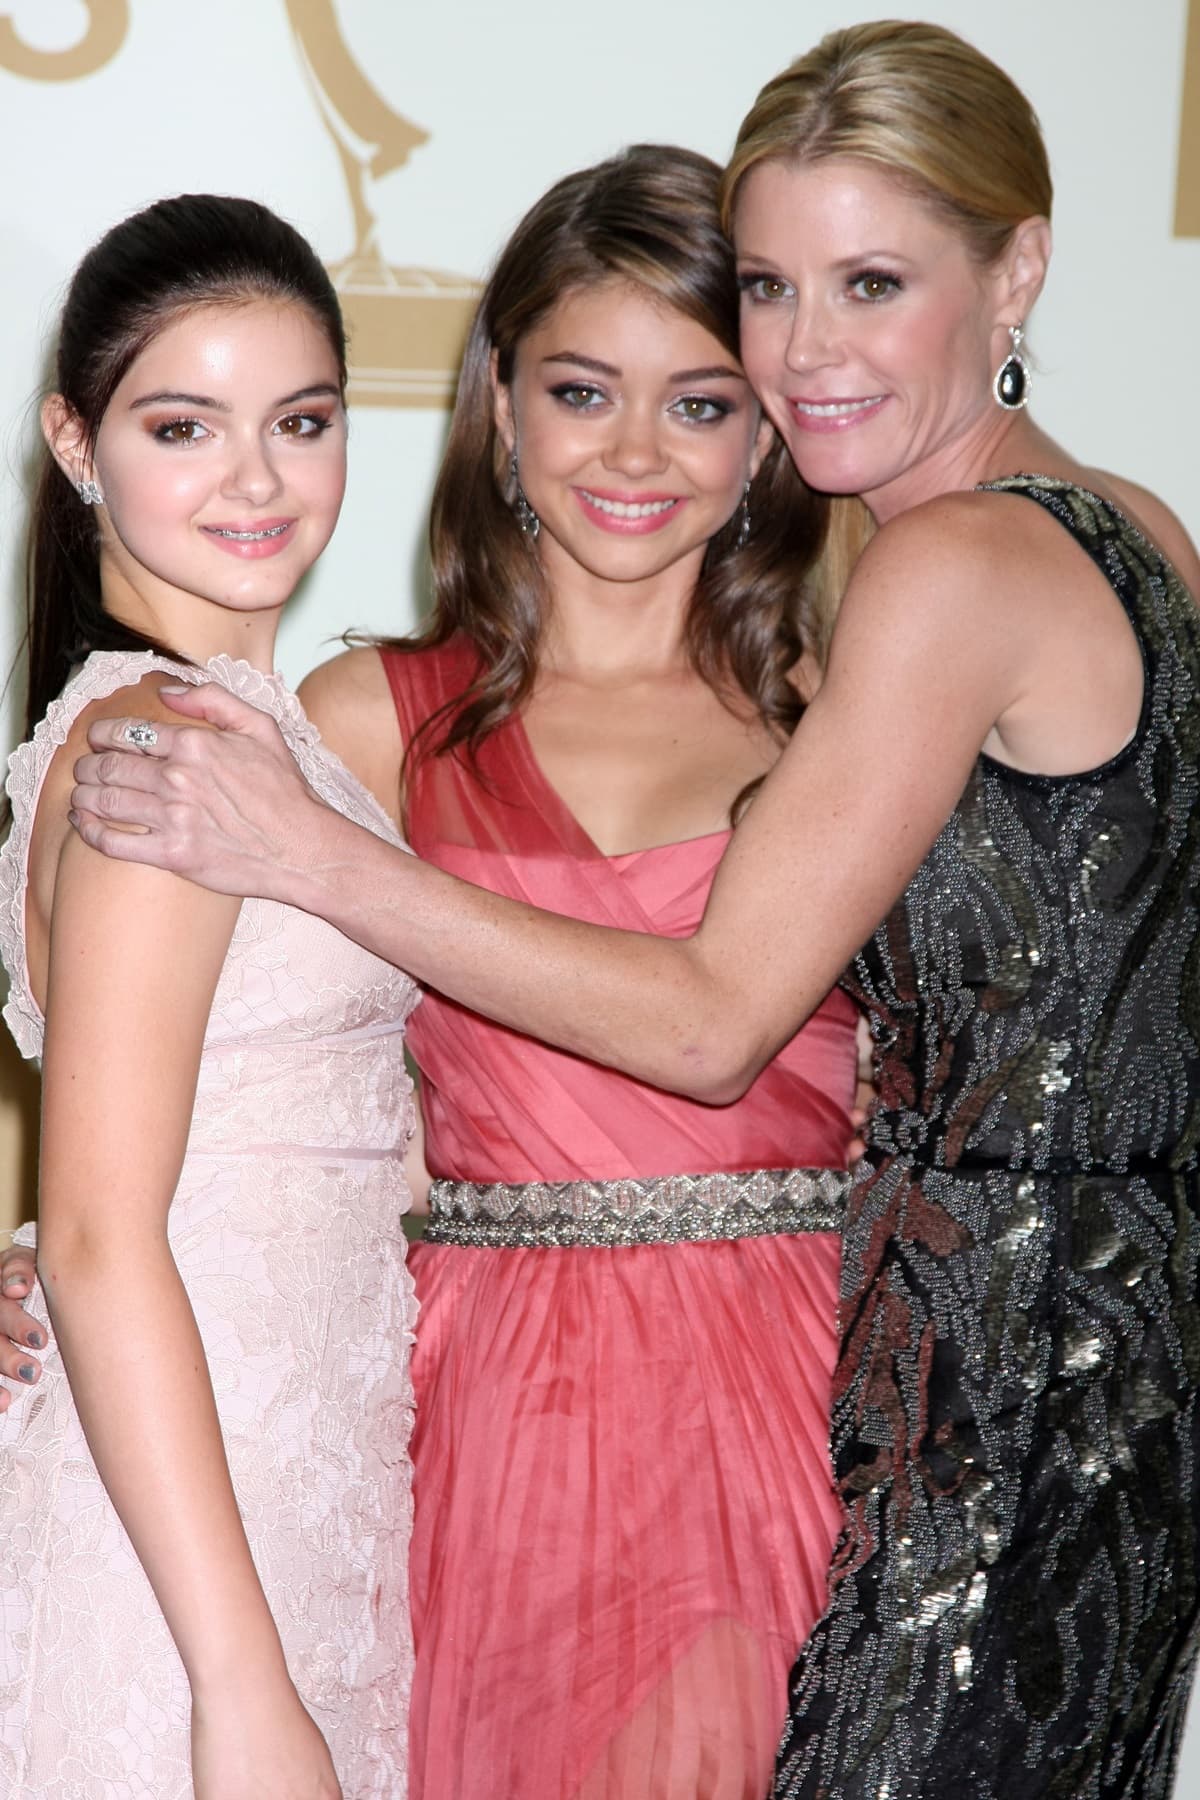 Ariel Winter, Sarah Hyland, and Julie Bowen, who all starred in the popular sitcom Modern Family, attend the 63rd Annual Primetime Emmy Awards